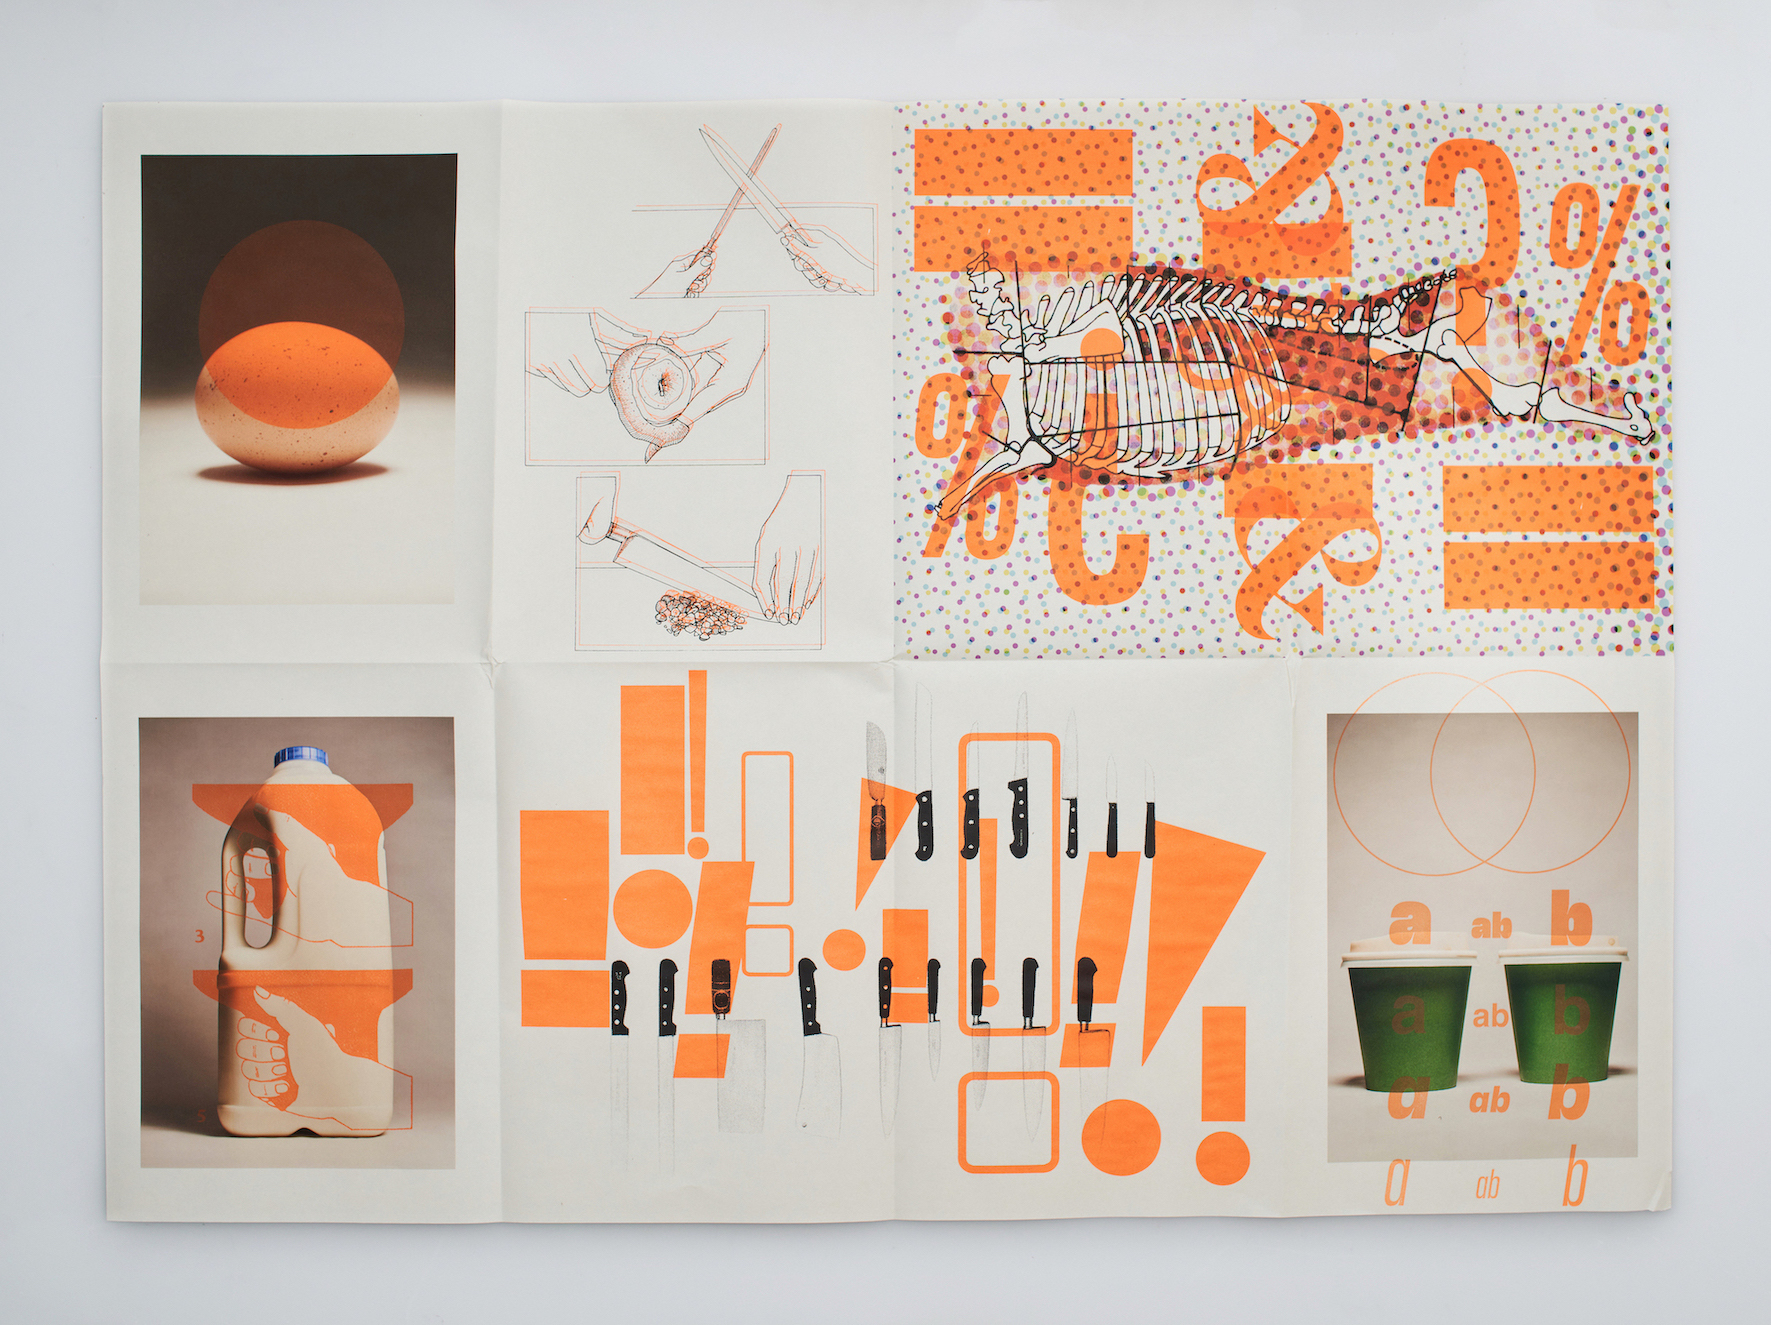 MA Communication Design work by Tom Brannigan showing sketches and images of kitchen items overlayed with orange graphics.